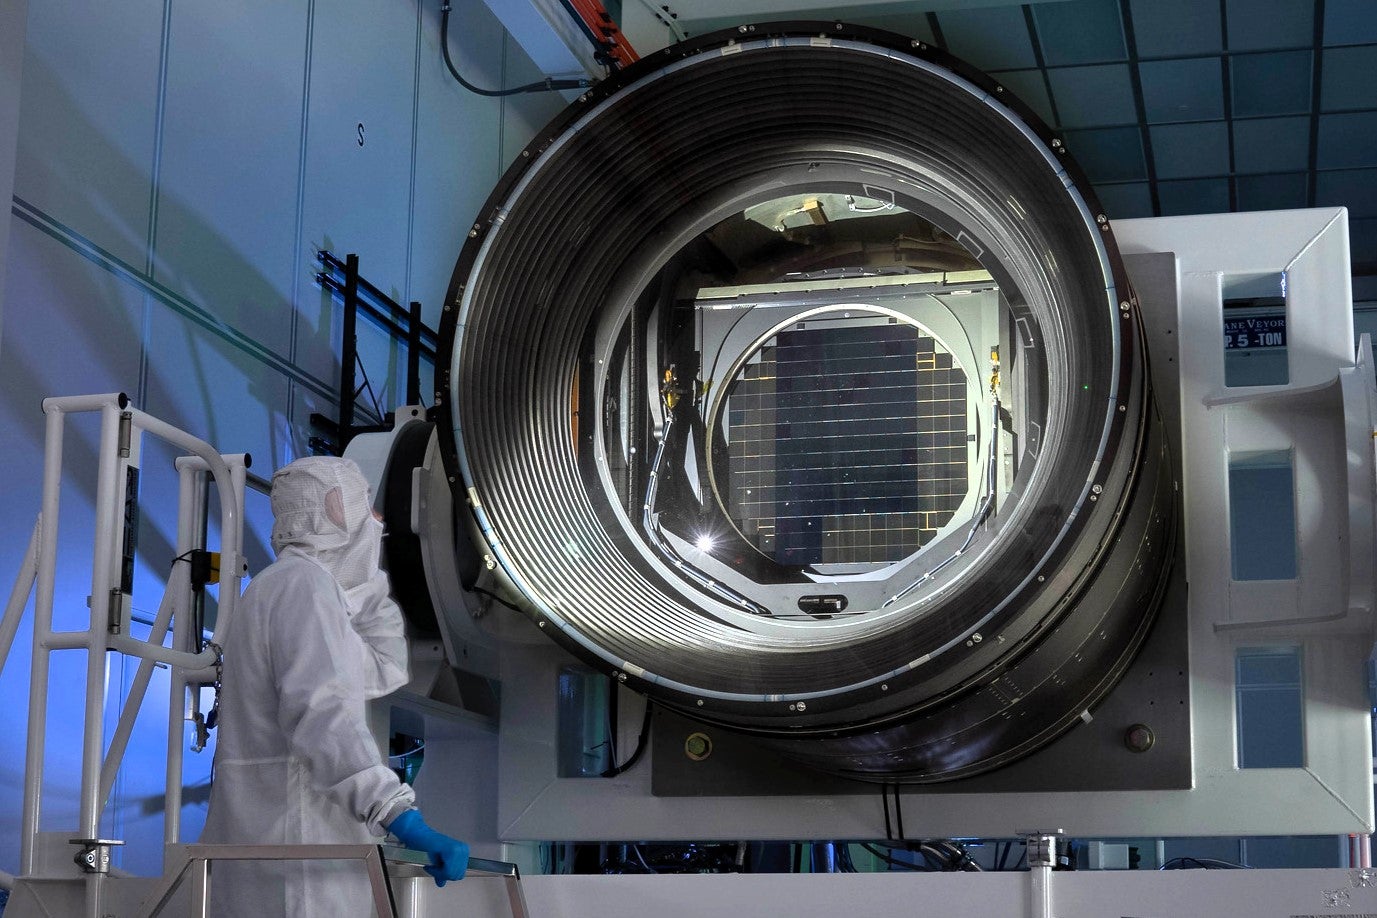 The LSST Camera is the size of a small car